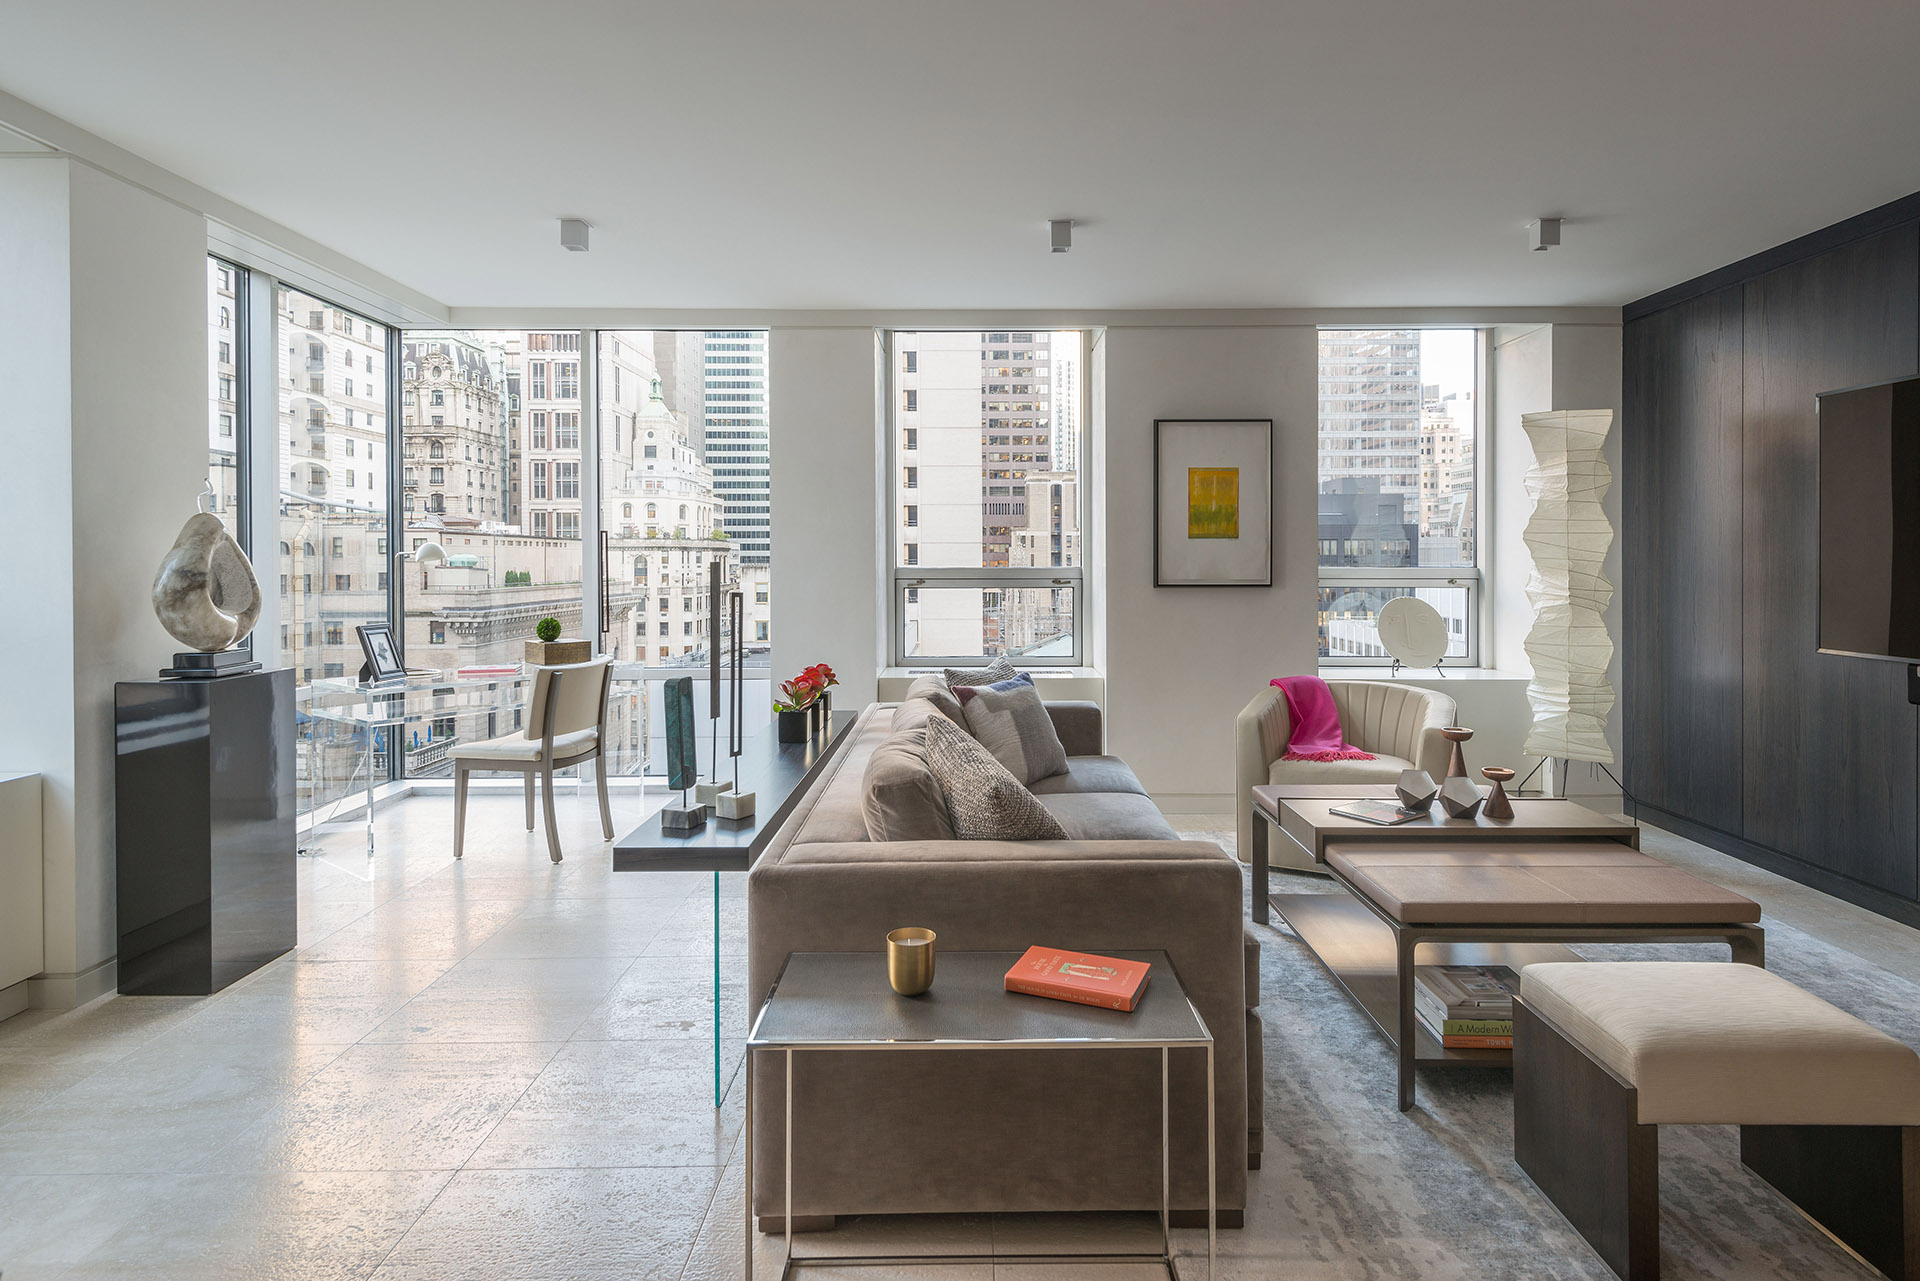 Contemporary Midtown Apt - Asbacher Architecture